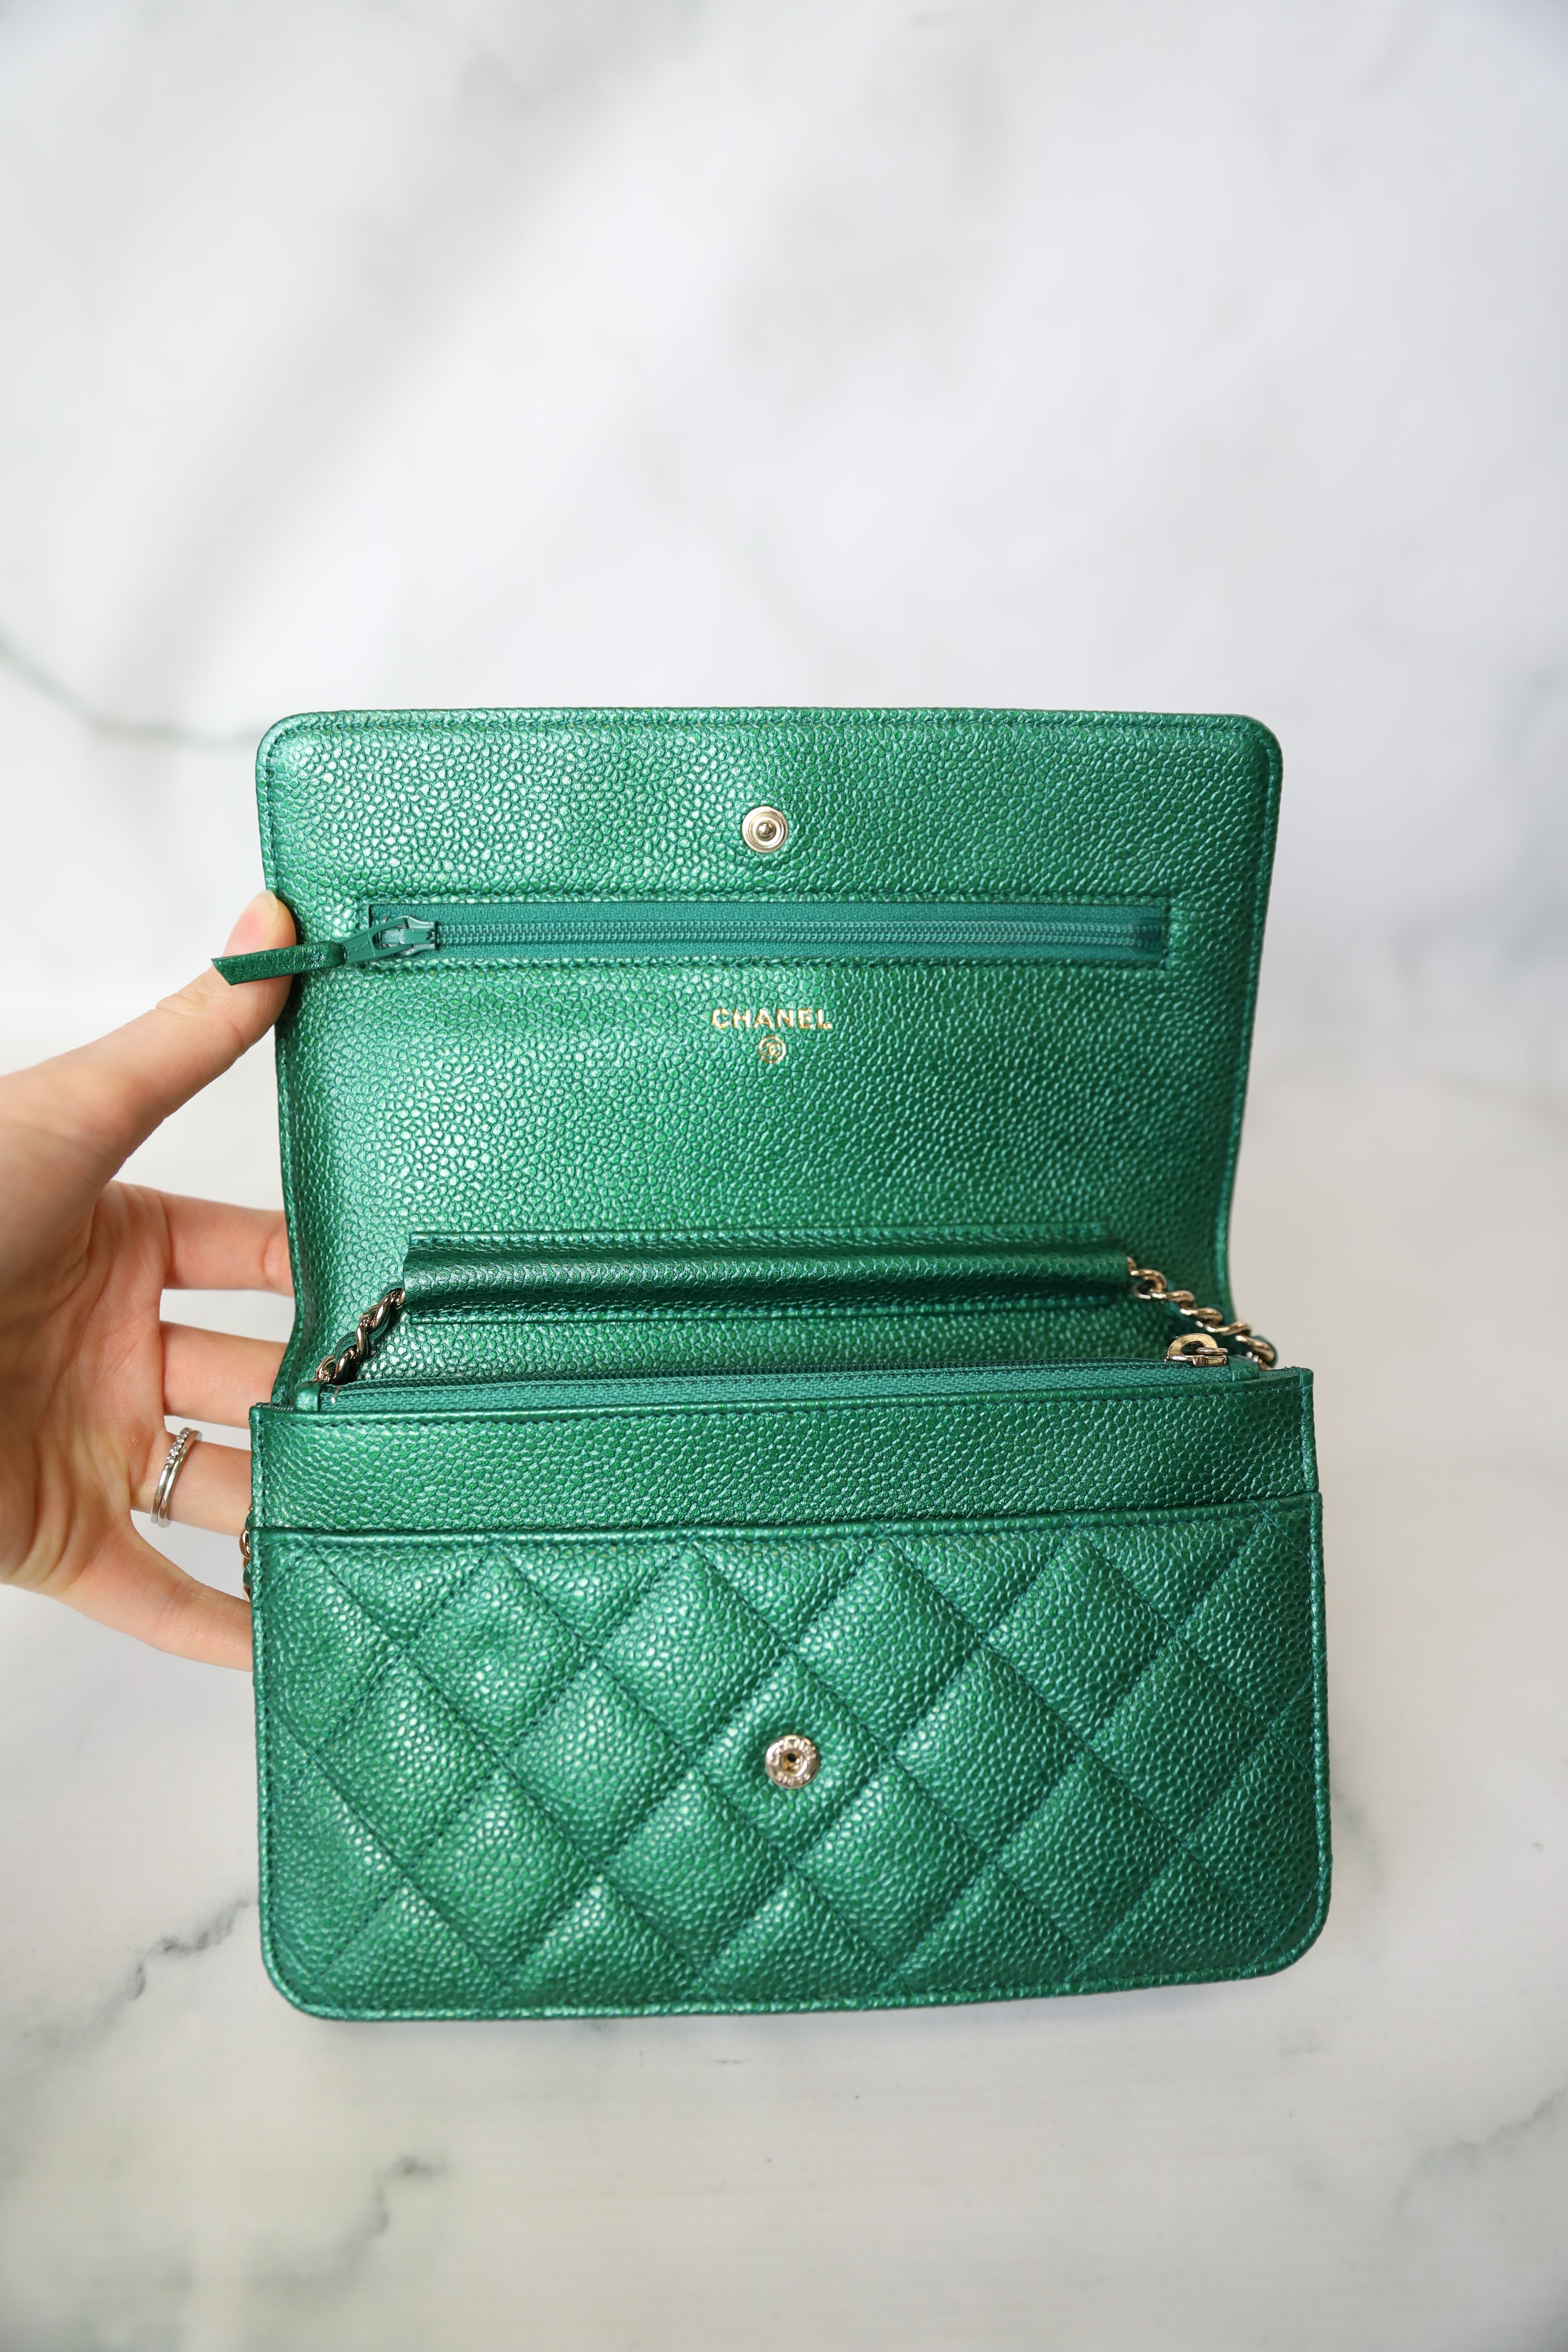 Chanel Classic Wallet on Chain, 18S Iridescent Emerald Green Caviar with  Gold Hardware, Preowned in Dustbag WA001 - Julia Rose Boston